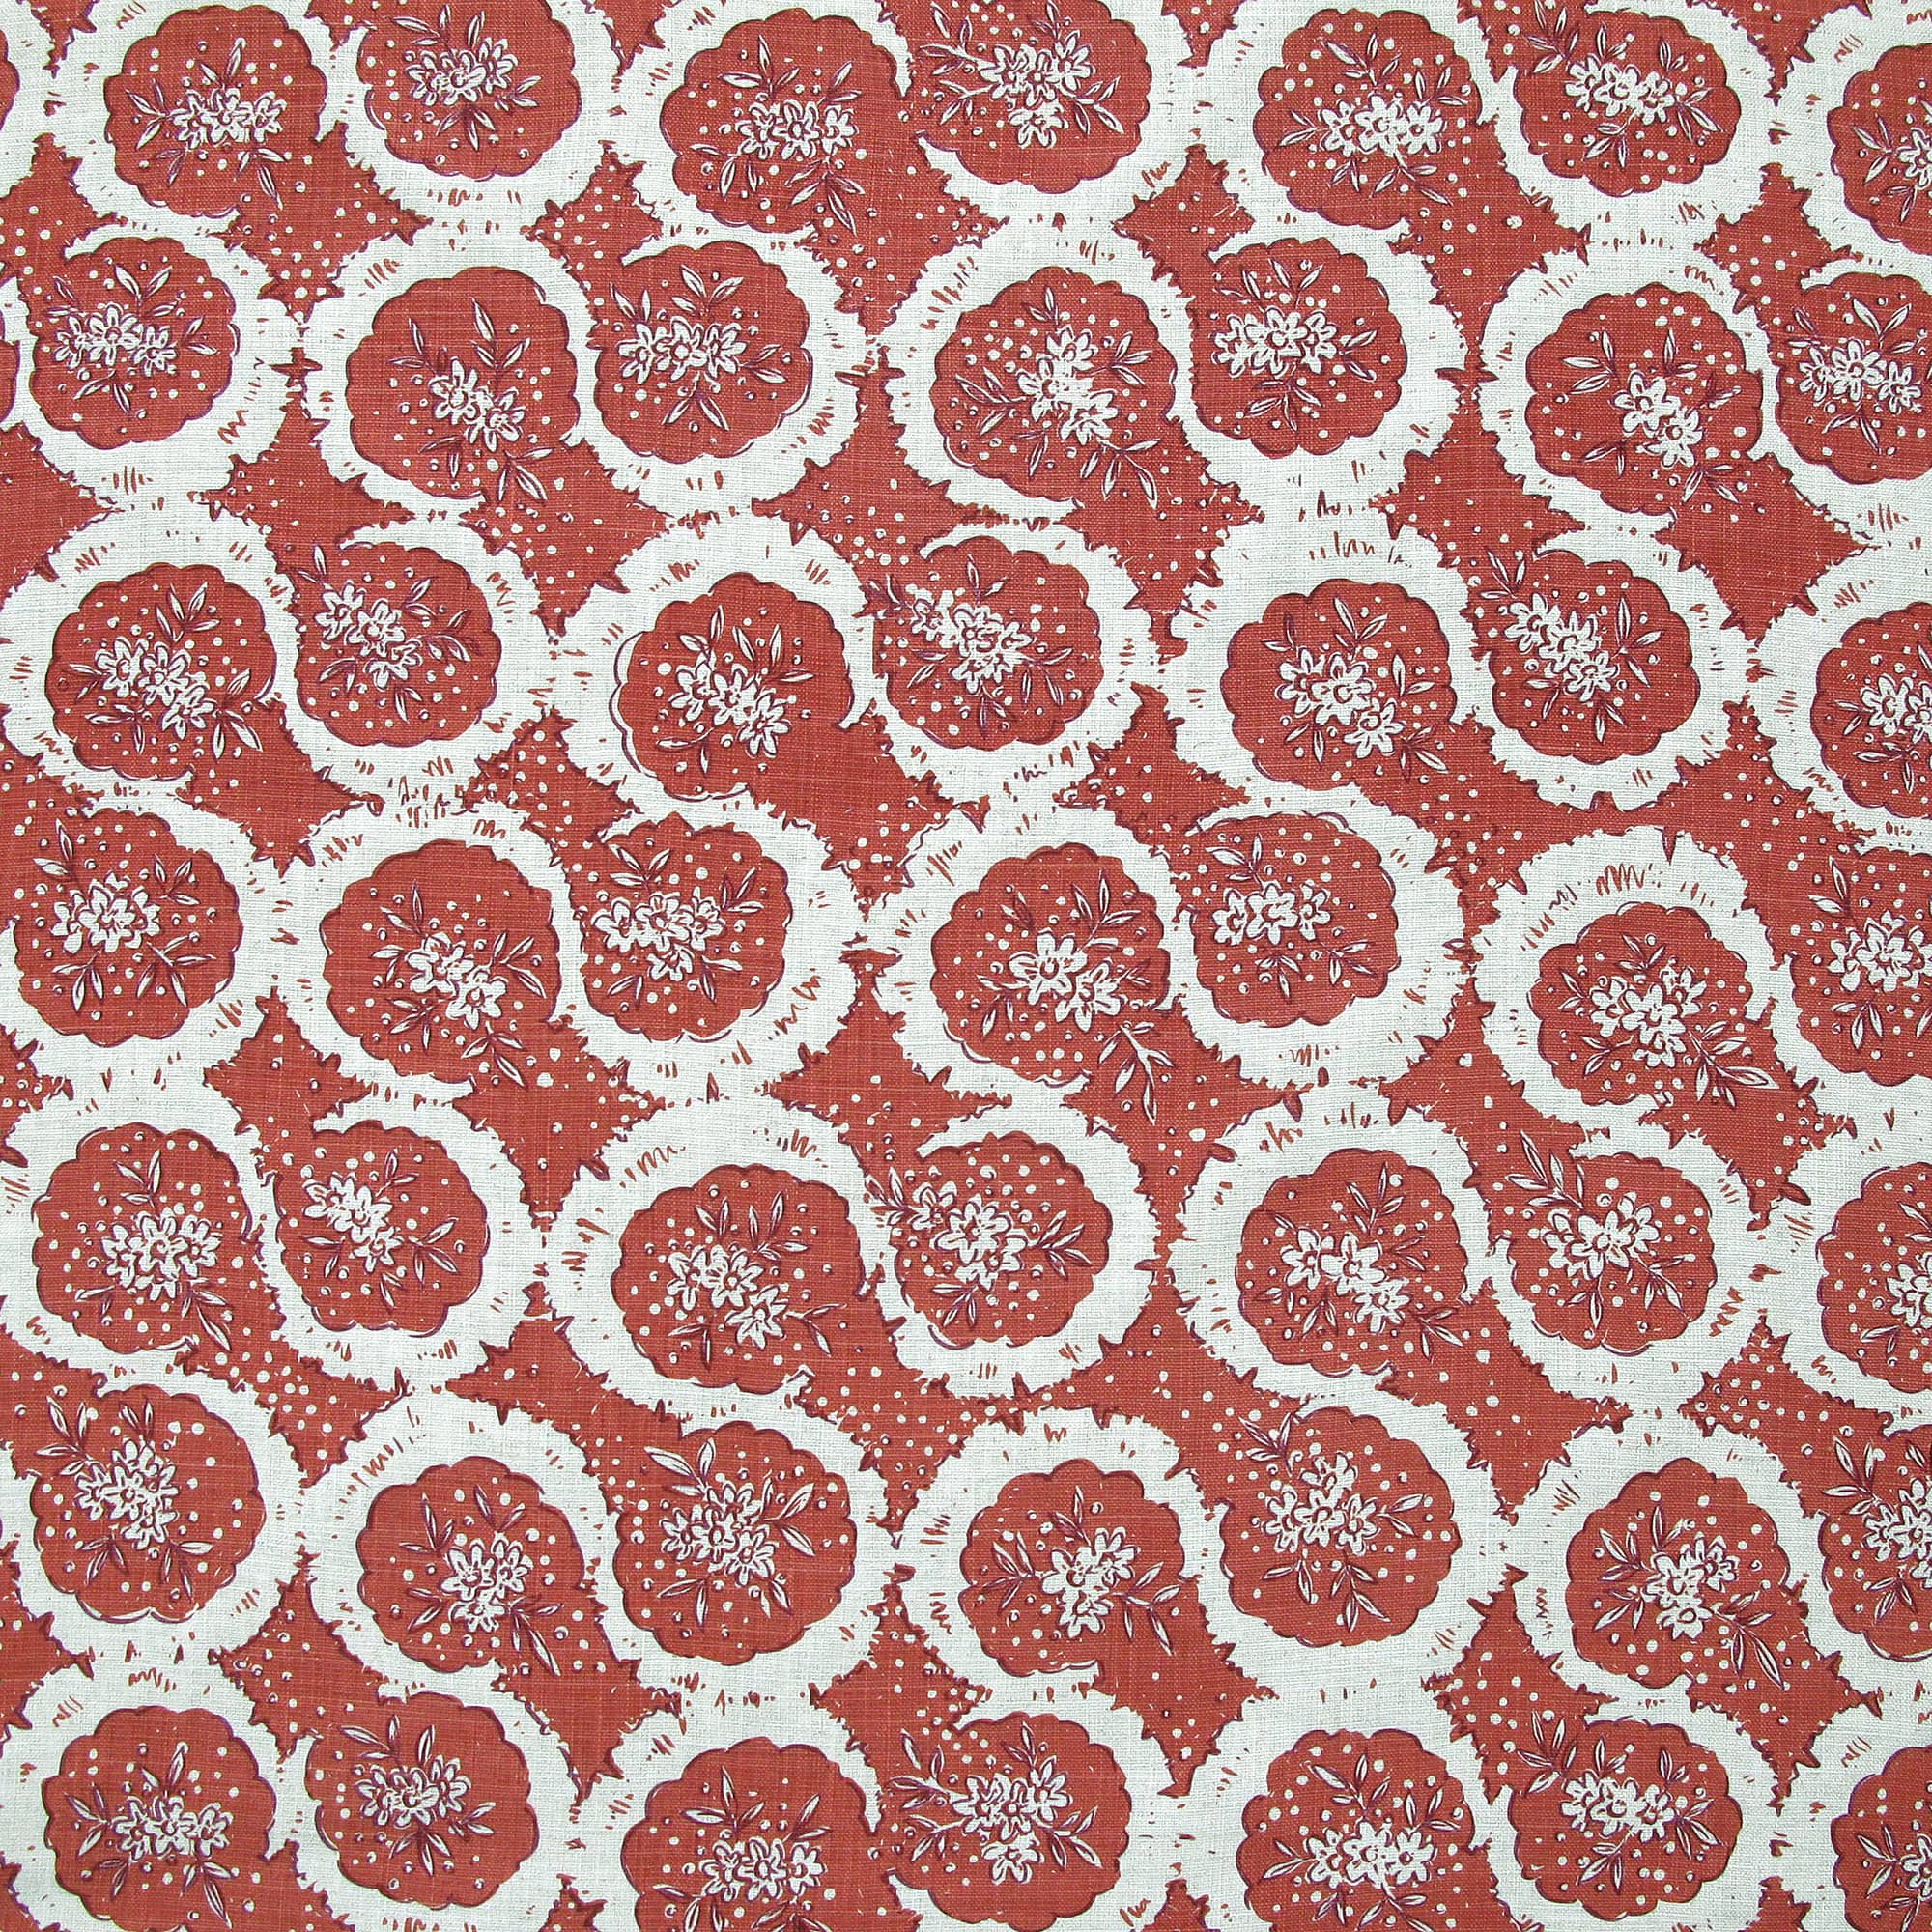 Detail of fabric in a meandering floral grid print in white and maroon on a red field.